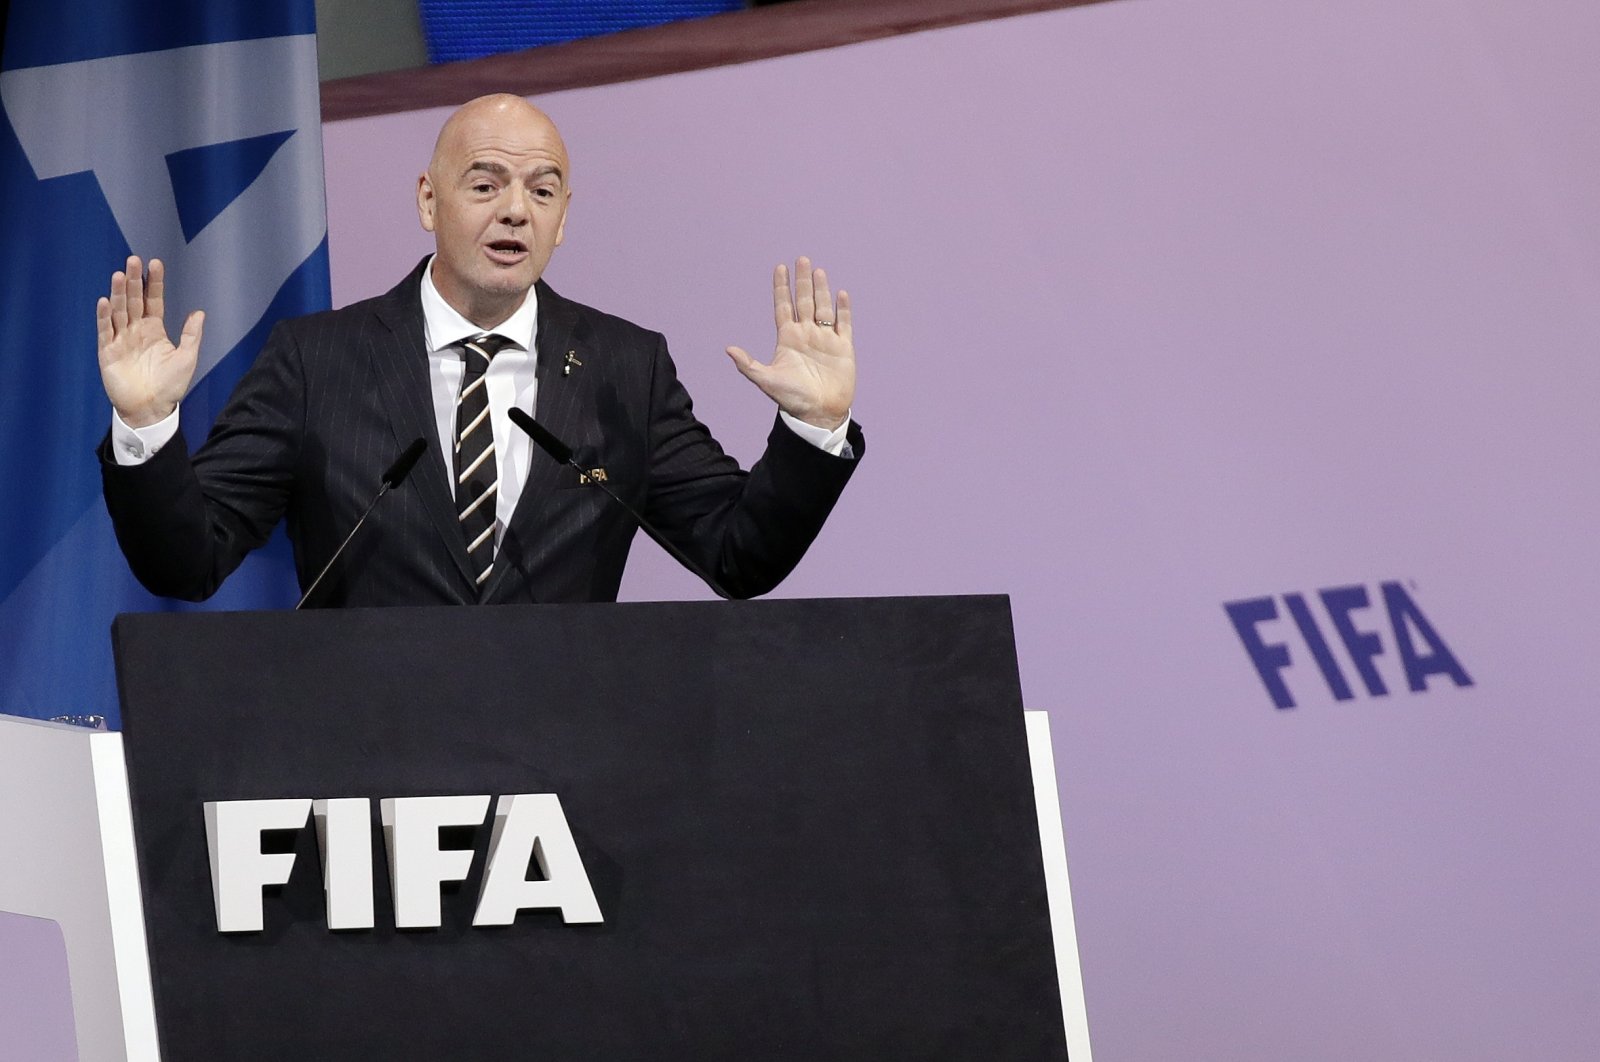 FIFA President Gianni Infantino speaks at the 69th FIFA congress in Paris, France, Sept. 22, 2019. (AP Photo)